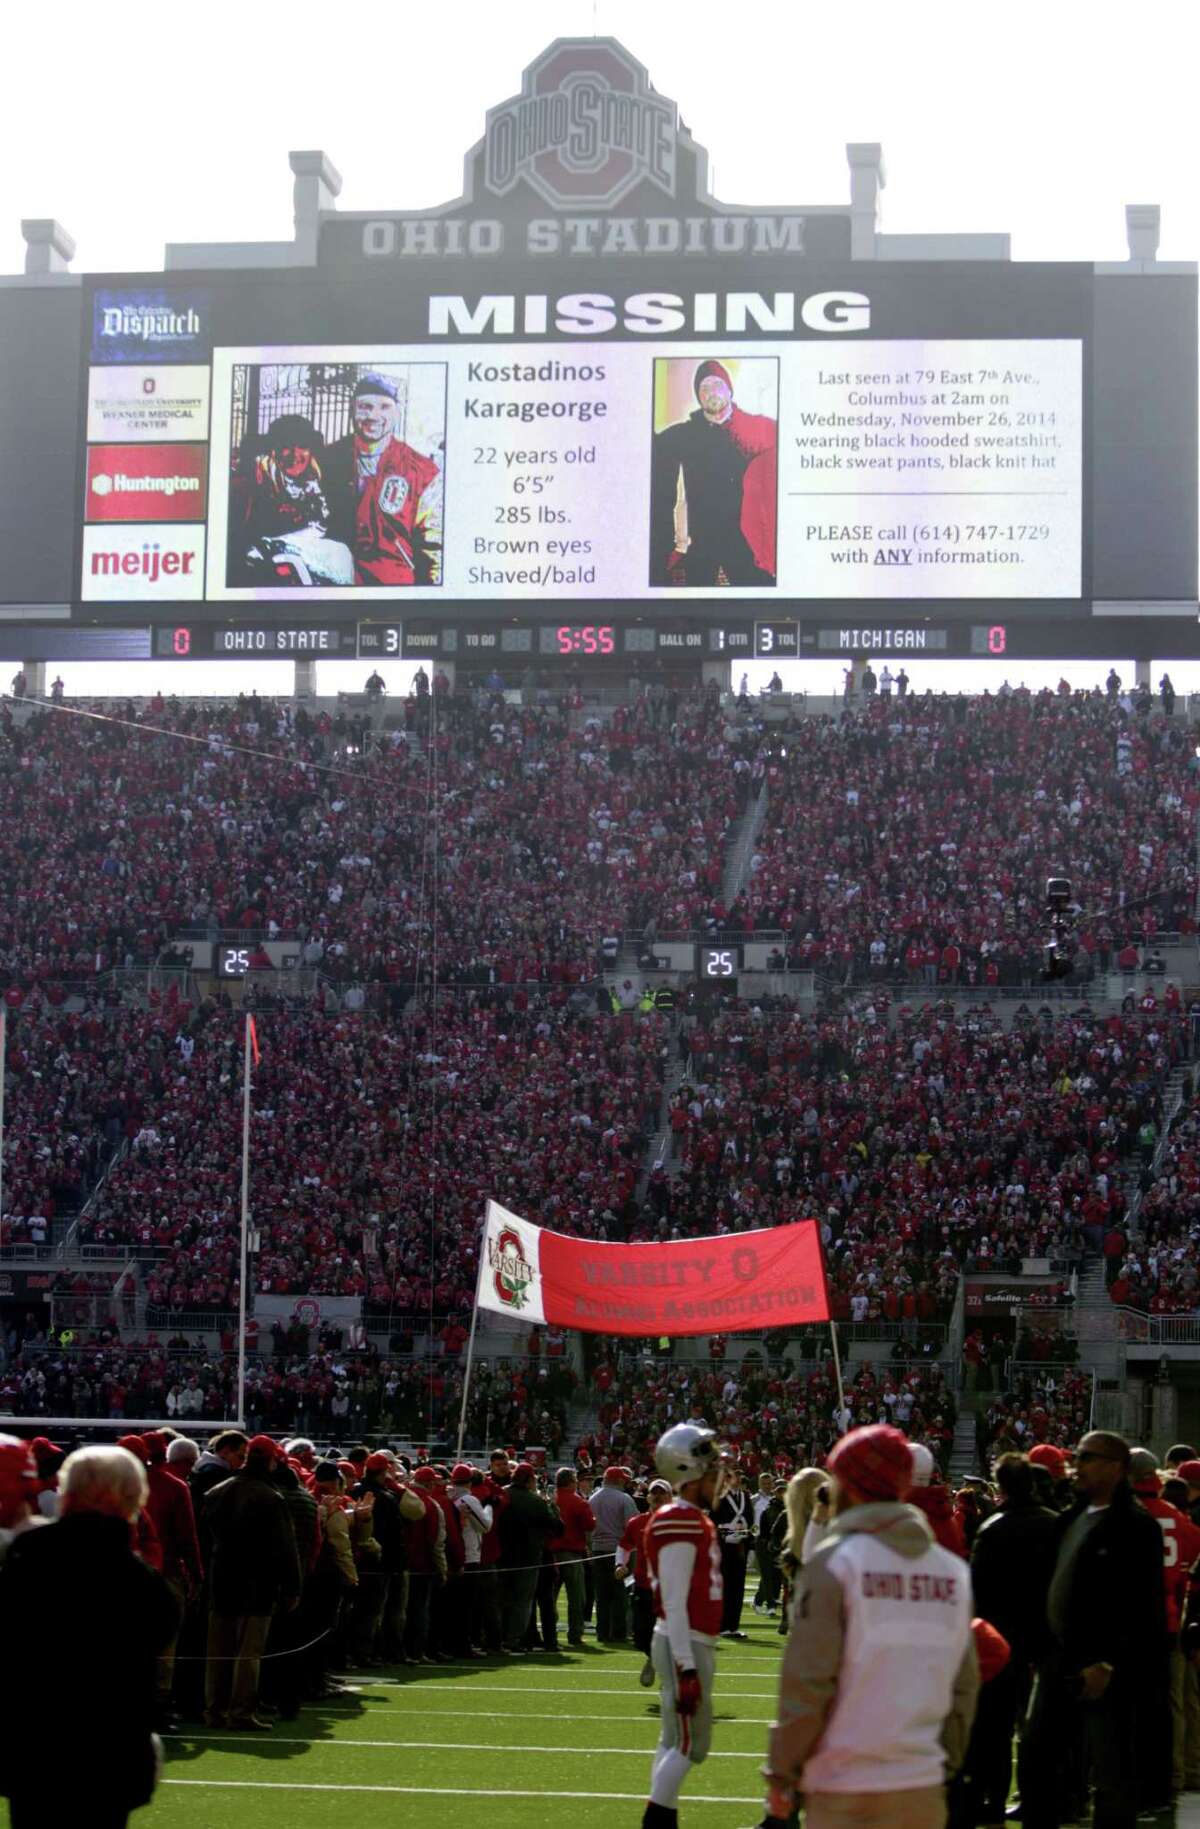 A police poster showing Kosta Karageorge, an Ohio State player who has been missing since earlier in the week, is displayed on the large video board at the south end of the field before the start of the Ohio State’s game against Michigan Saturday.